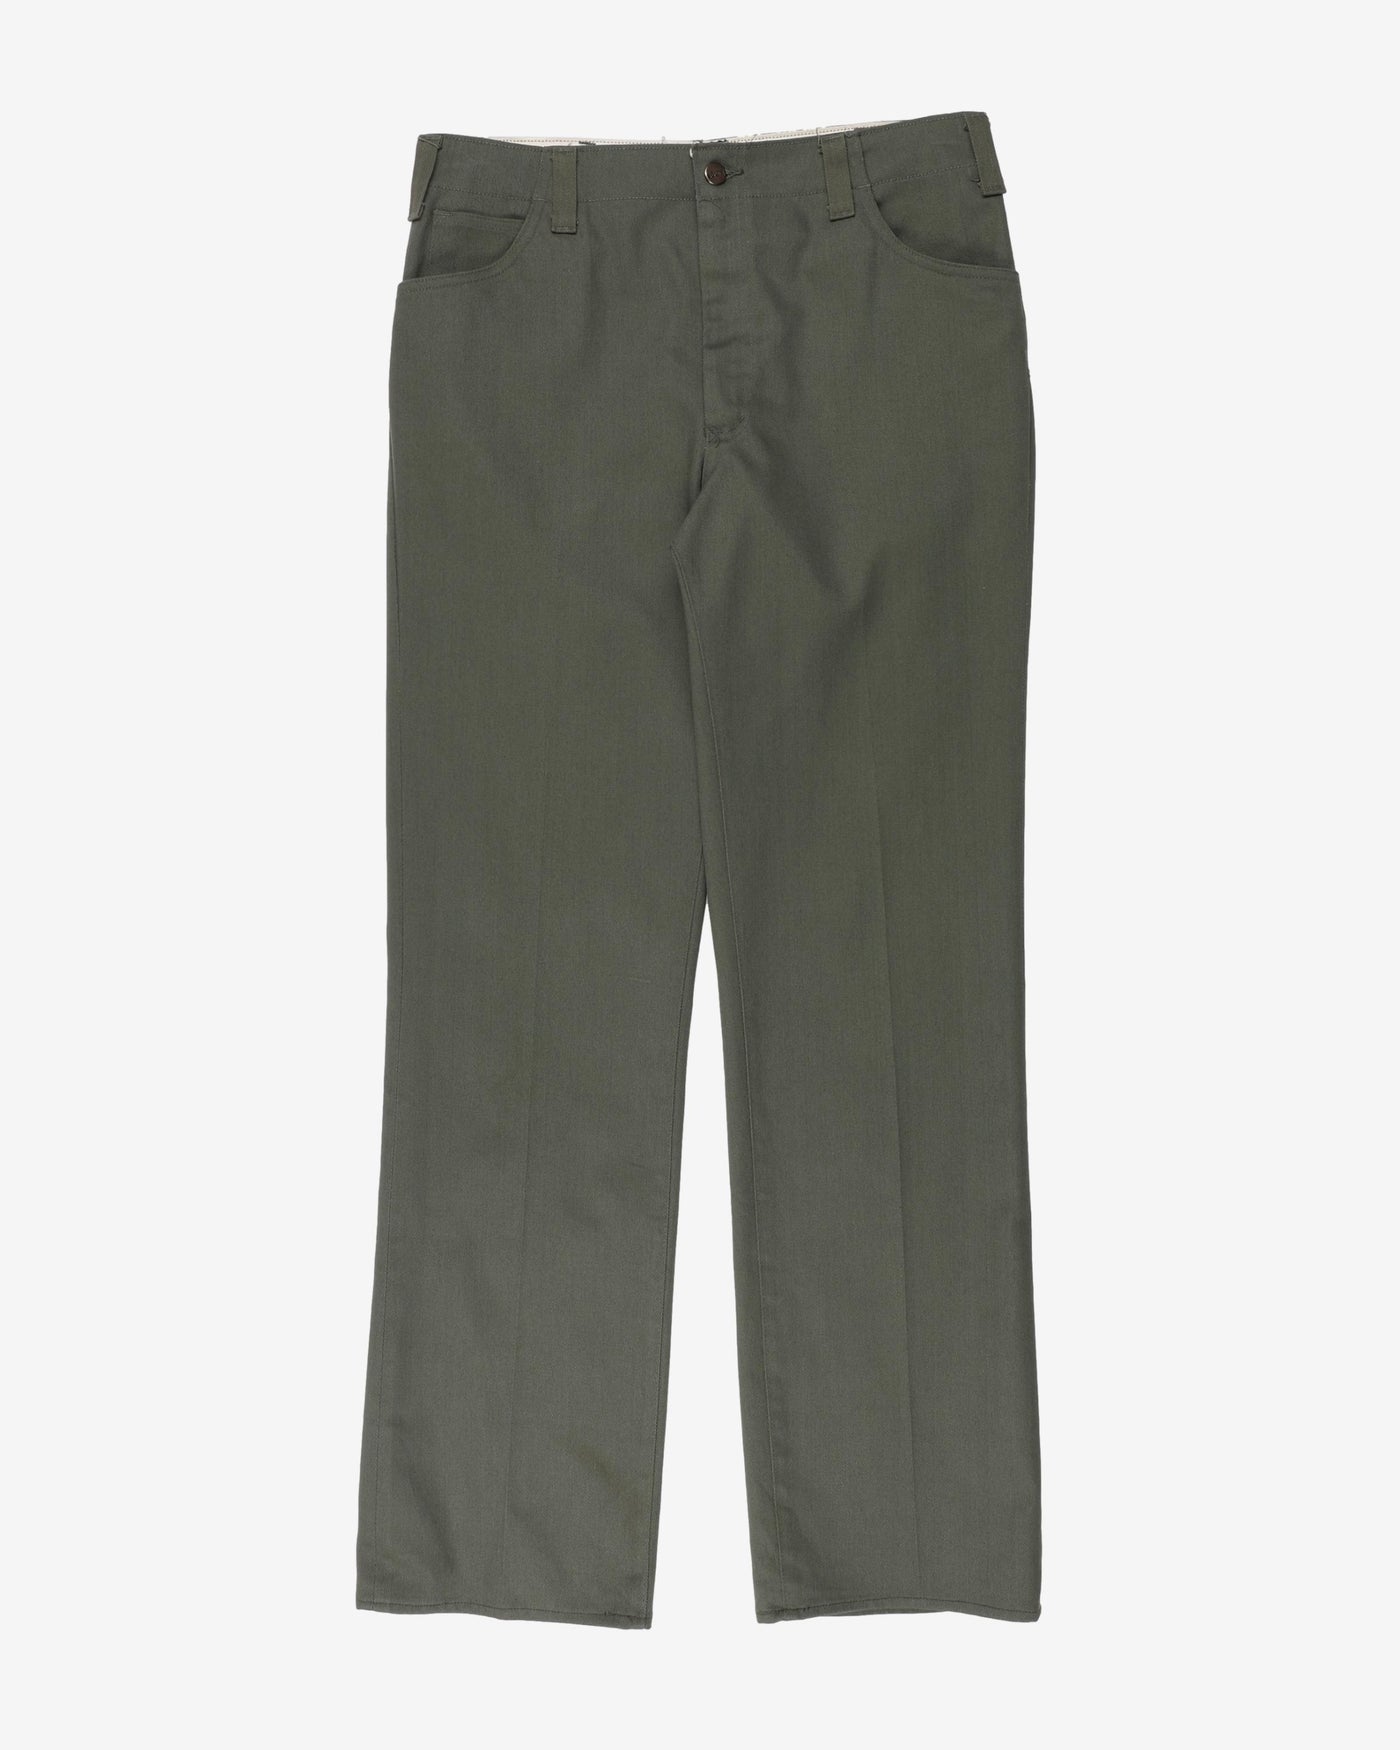 Vintage Green GWG Smart / Casual Trousers - W33 L31